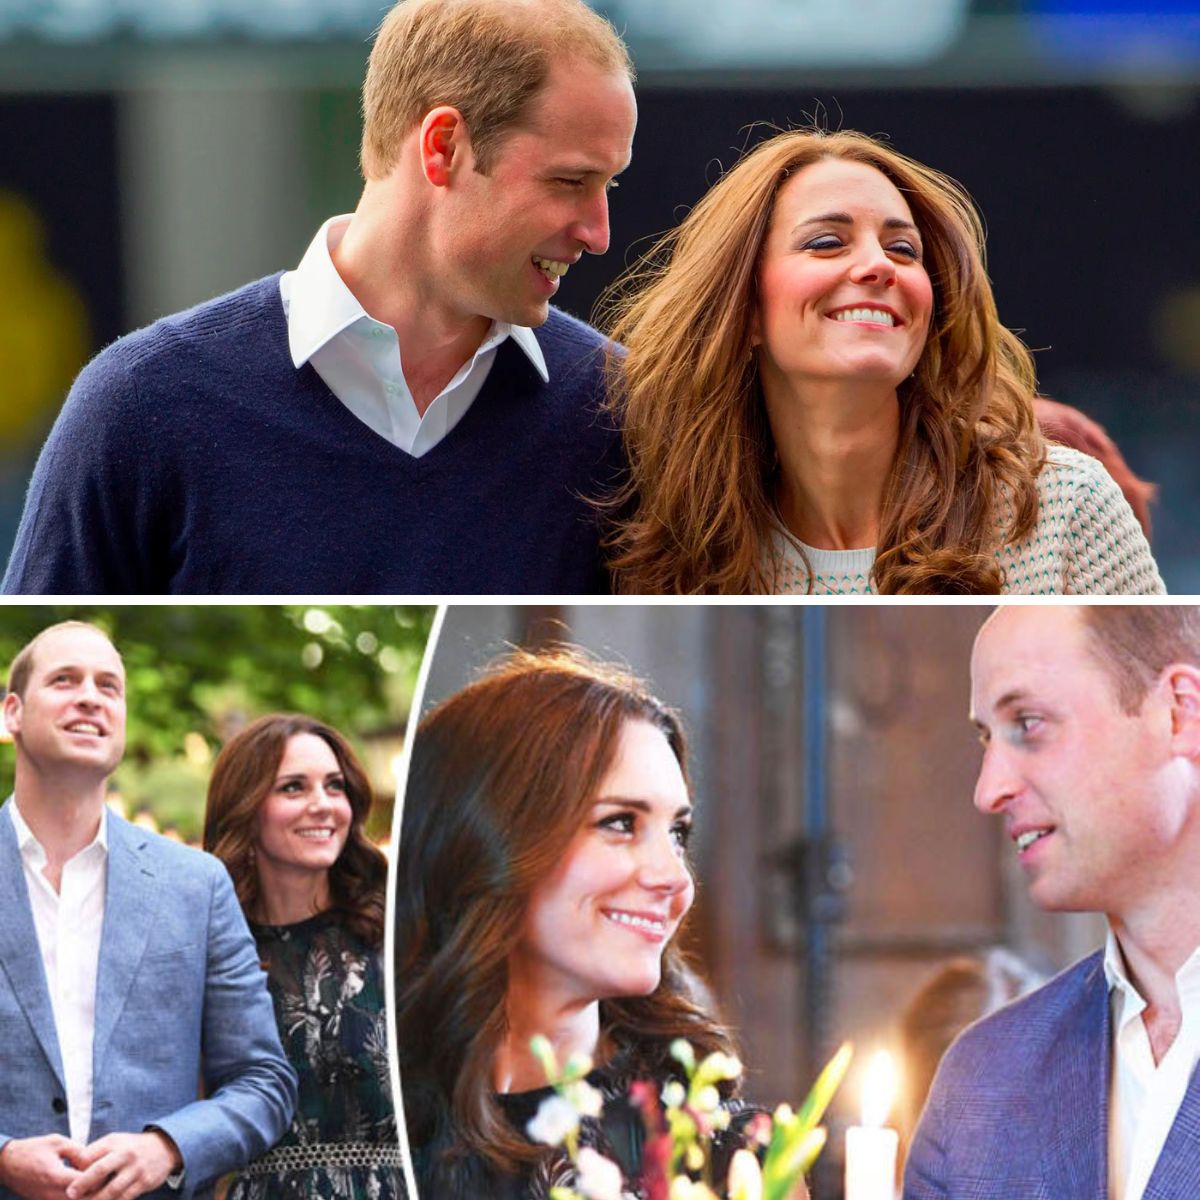 Deep Conversations and an Unbreakable Bond: A Stolen Moment of Tenderness Between William and Kate